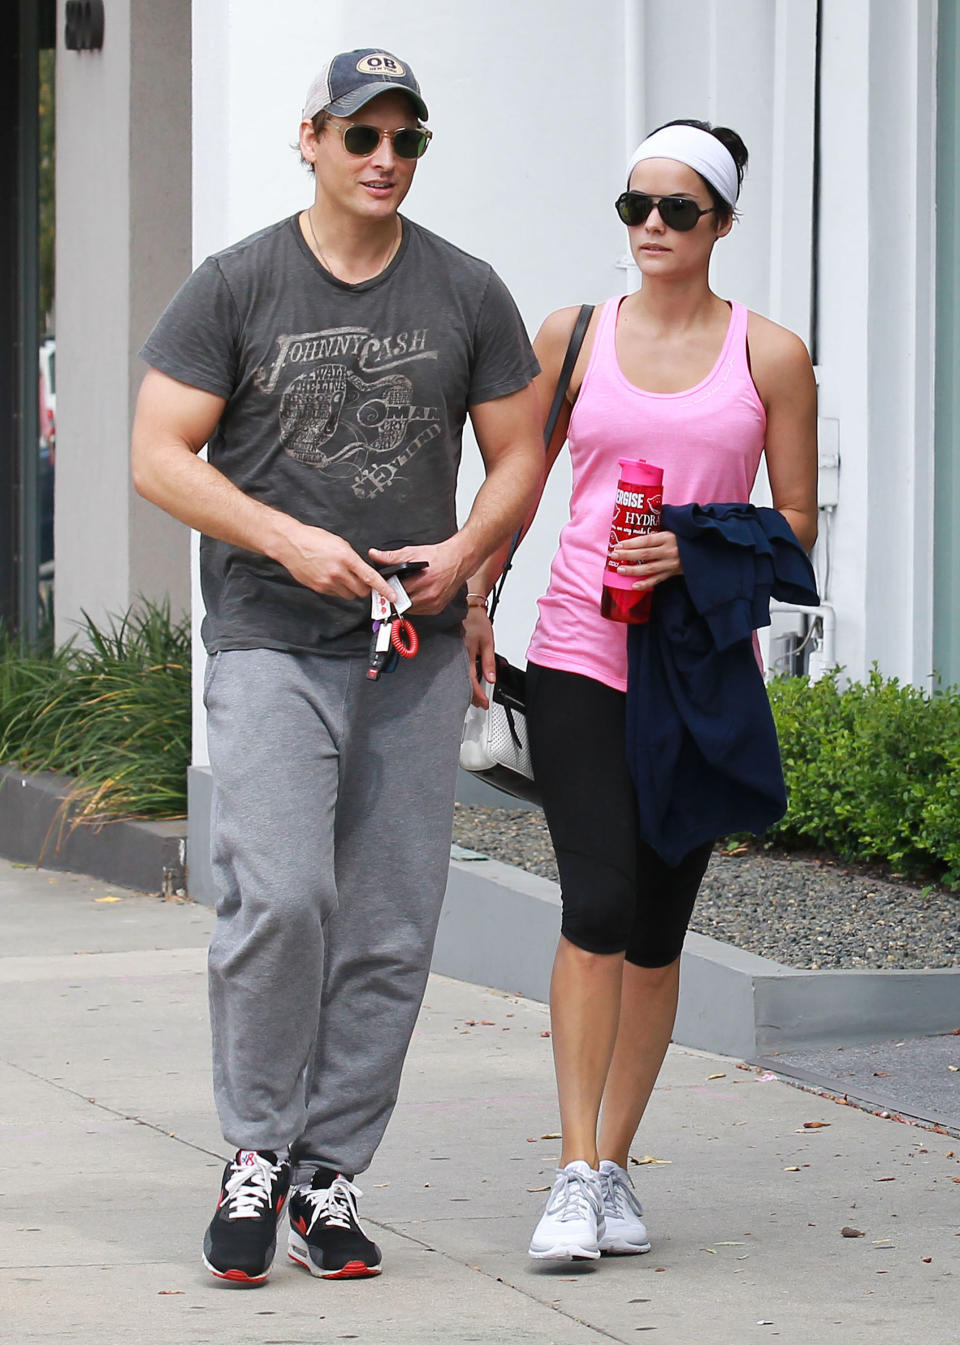 Peter Facinelli and Jaimie Alexander shared a kiss after their work out at a gym in West Hollywood, California on May 29.